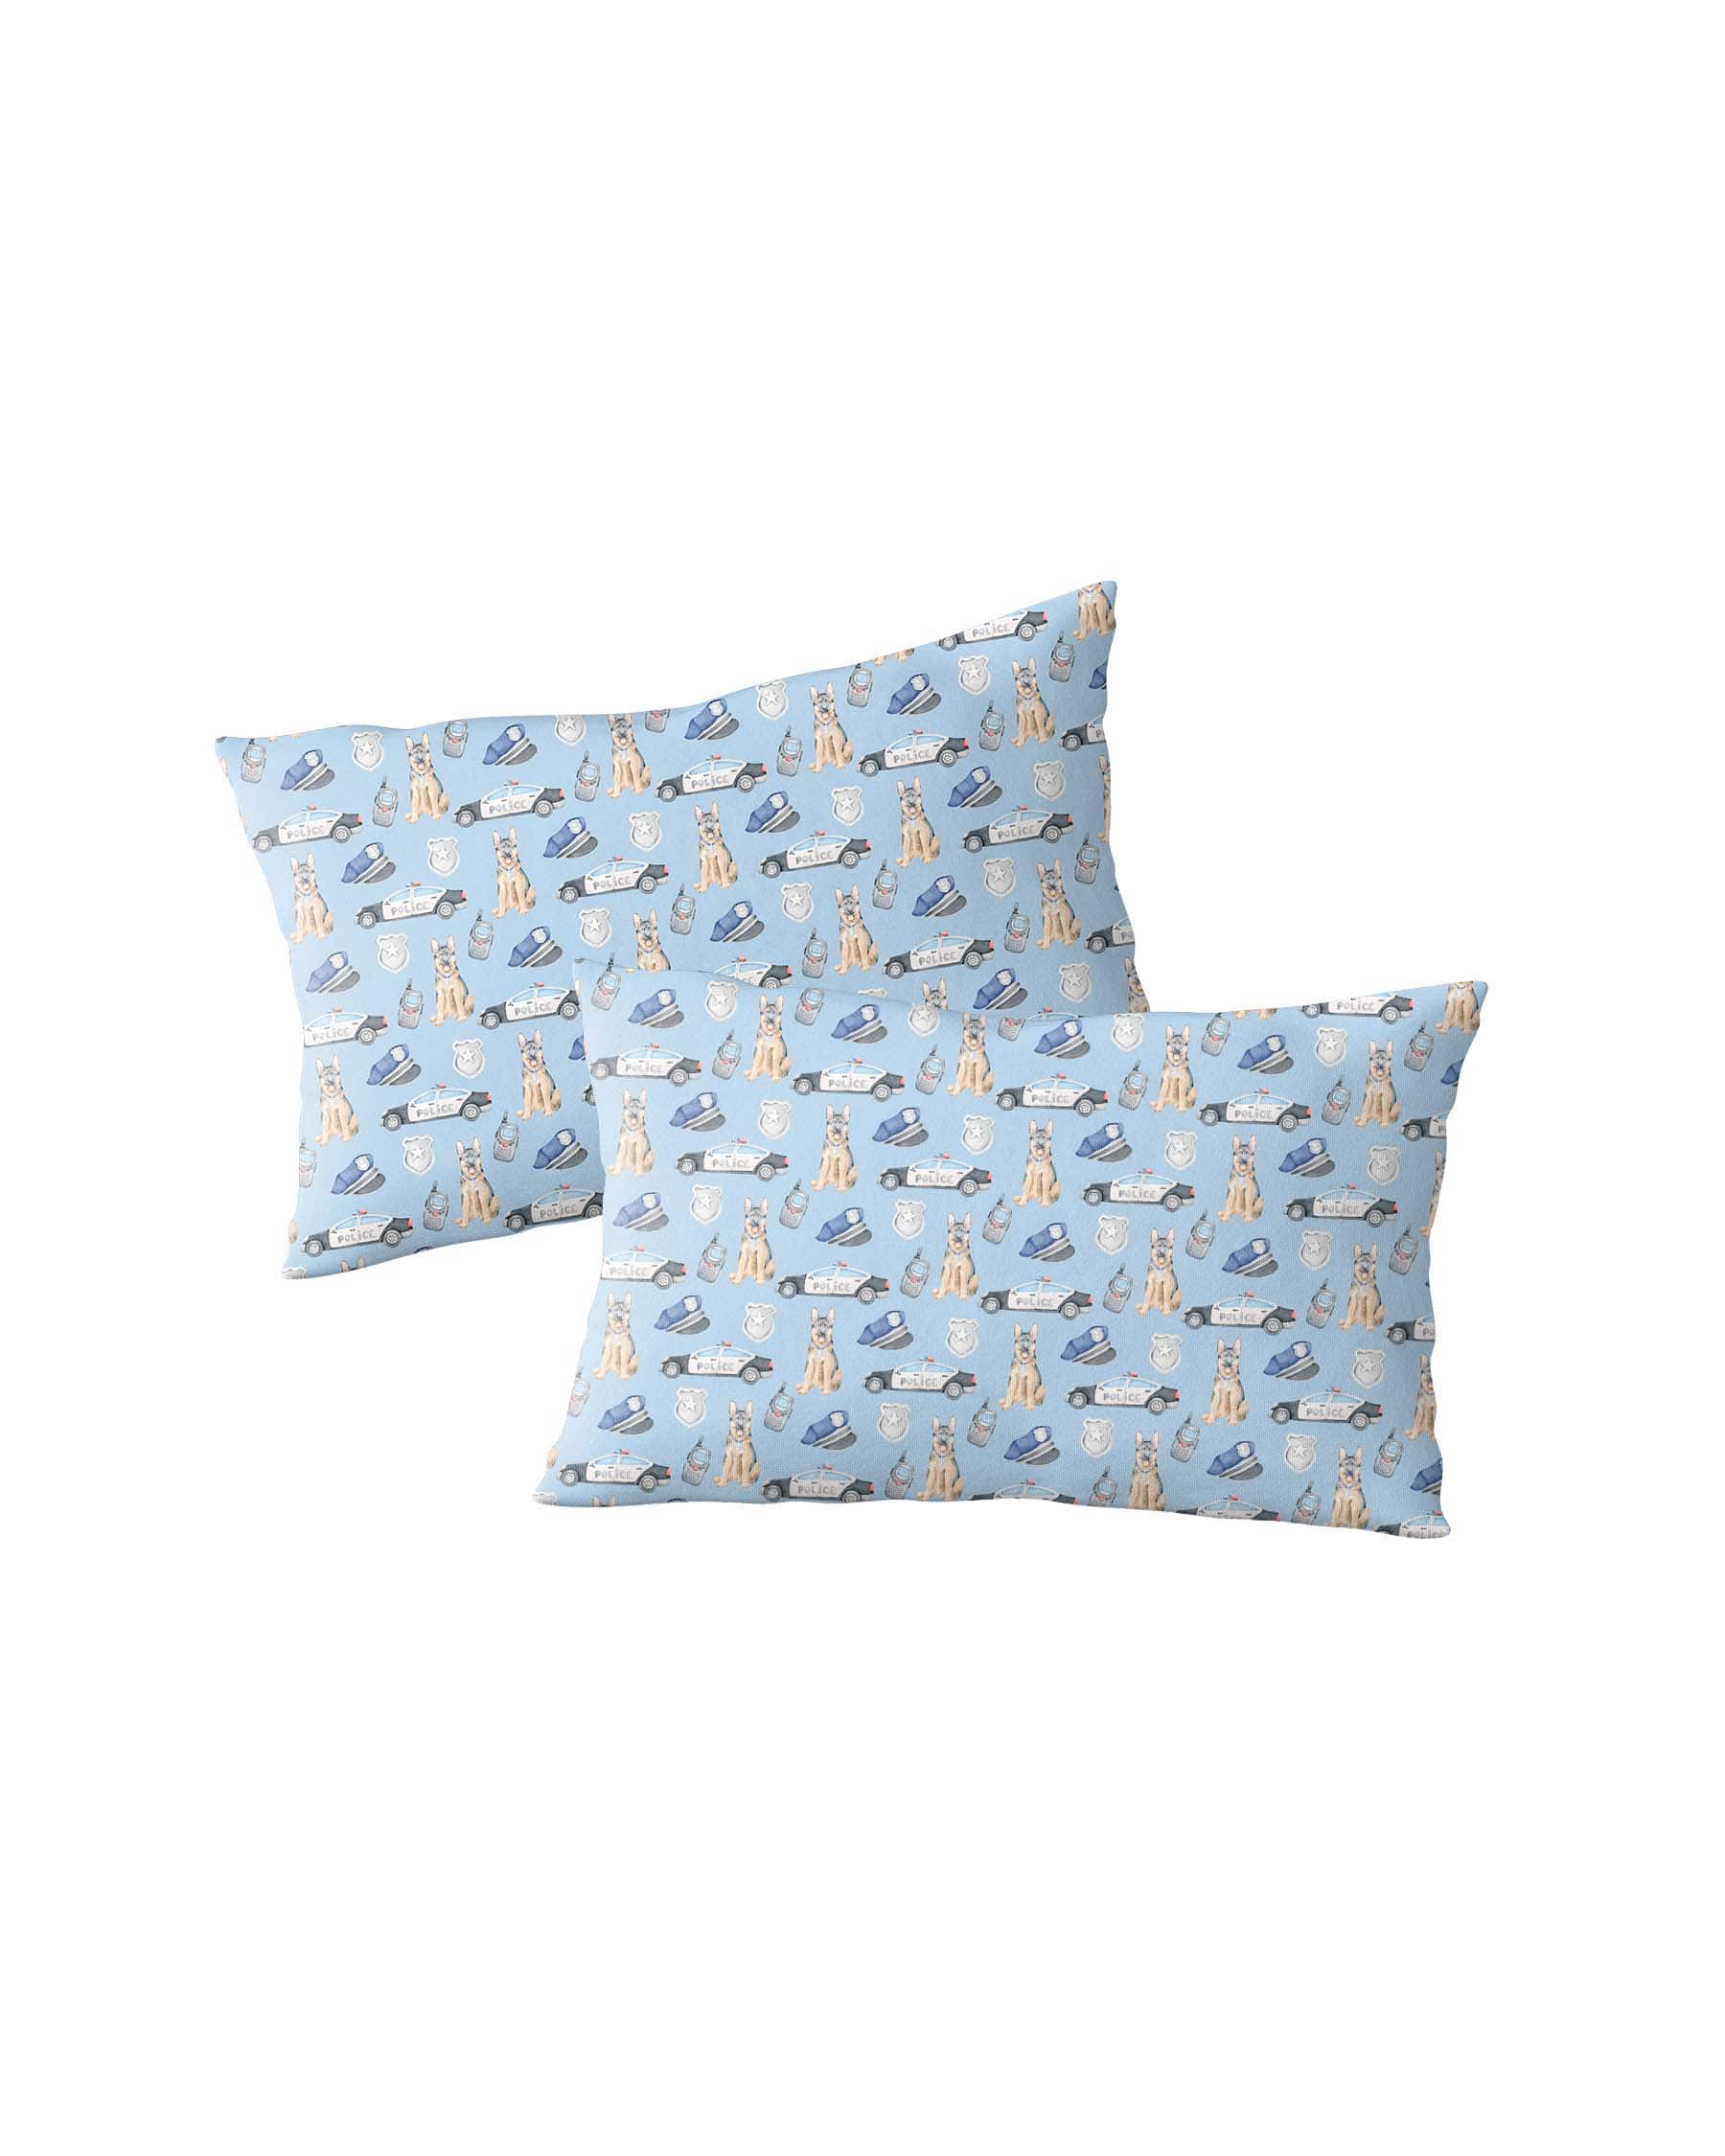 Police Bamboo Pillowcases: Set of 2